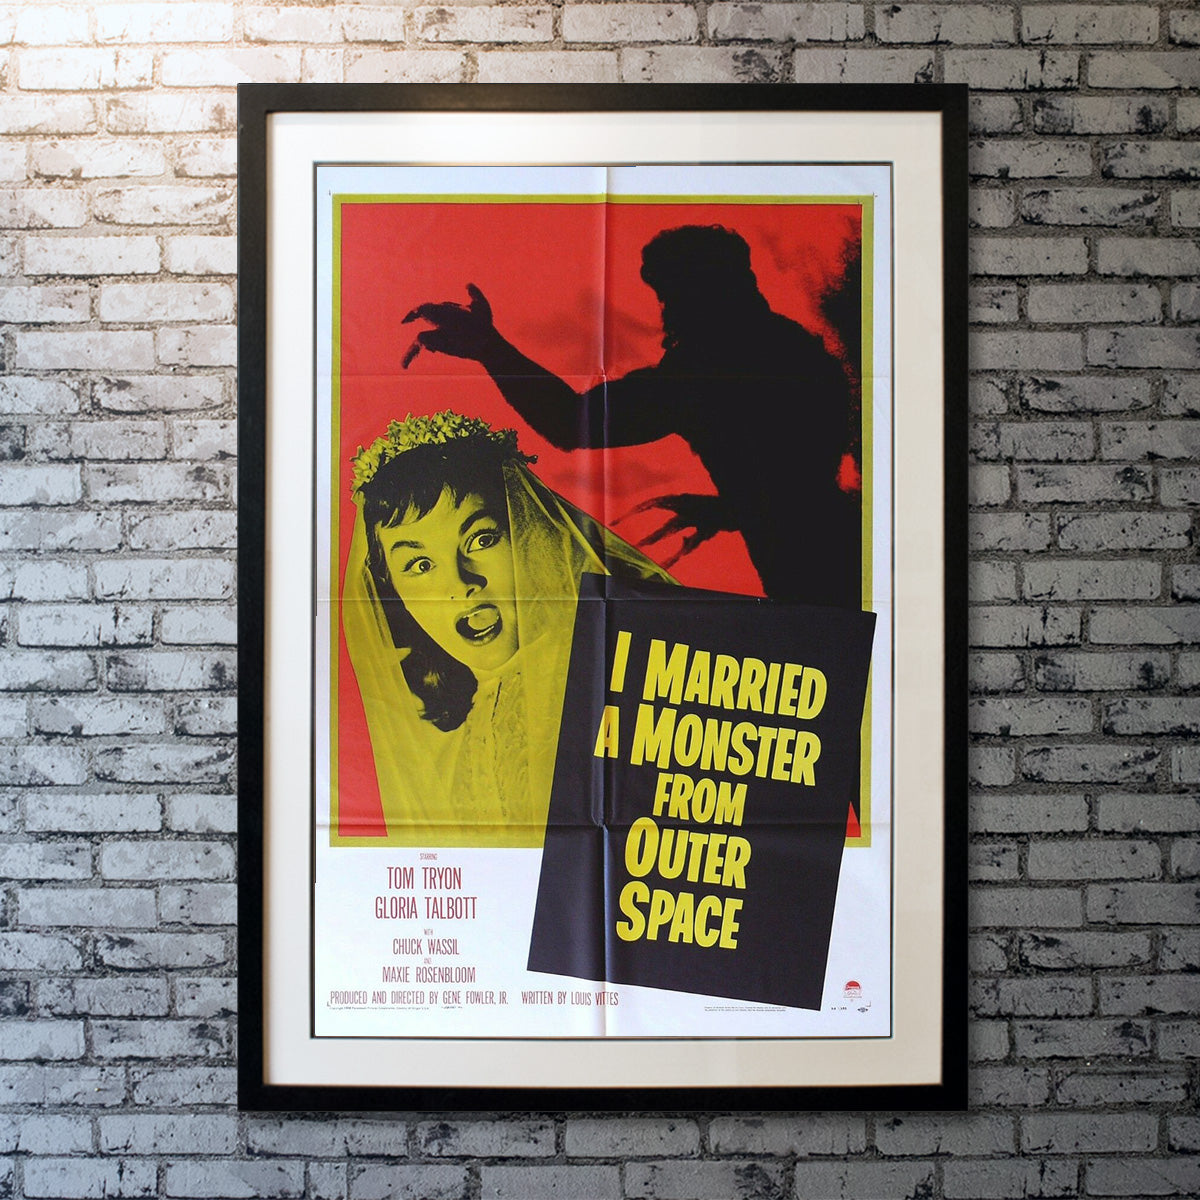 I Married A Monster From Outer Space (1958)